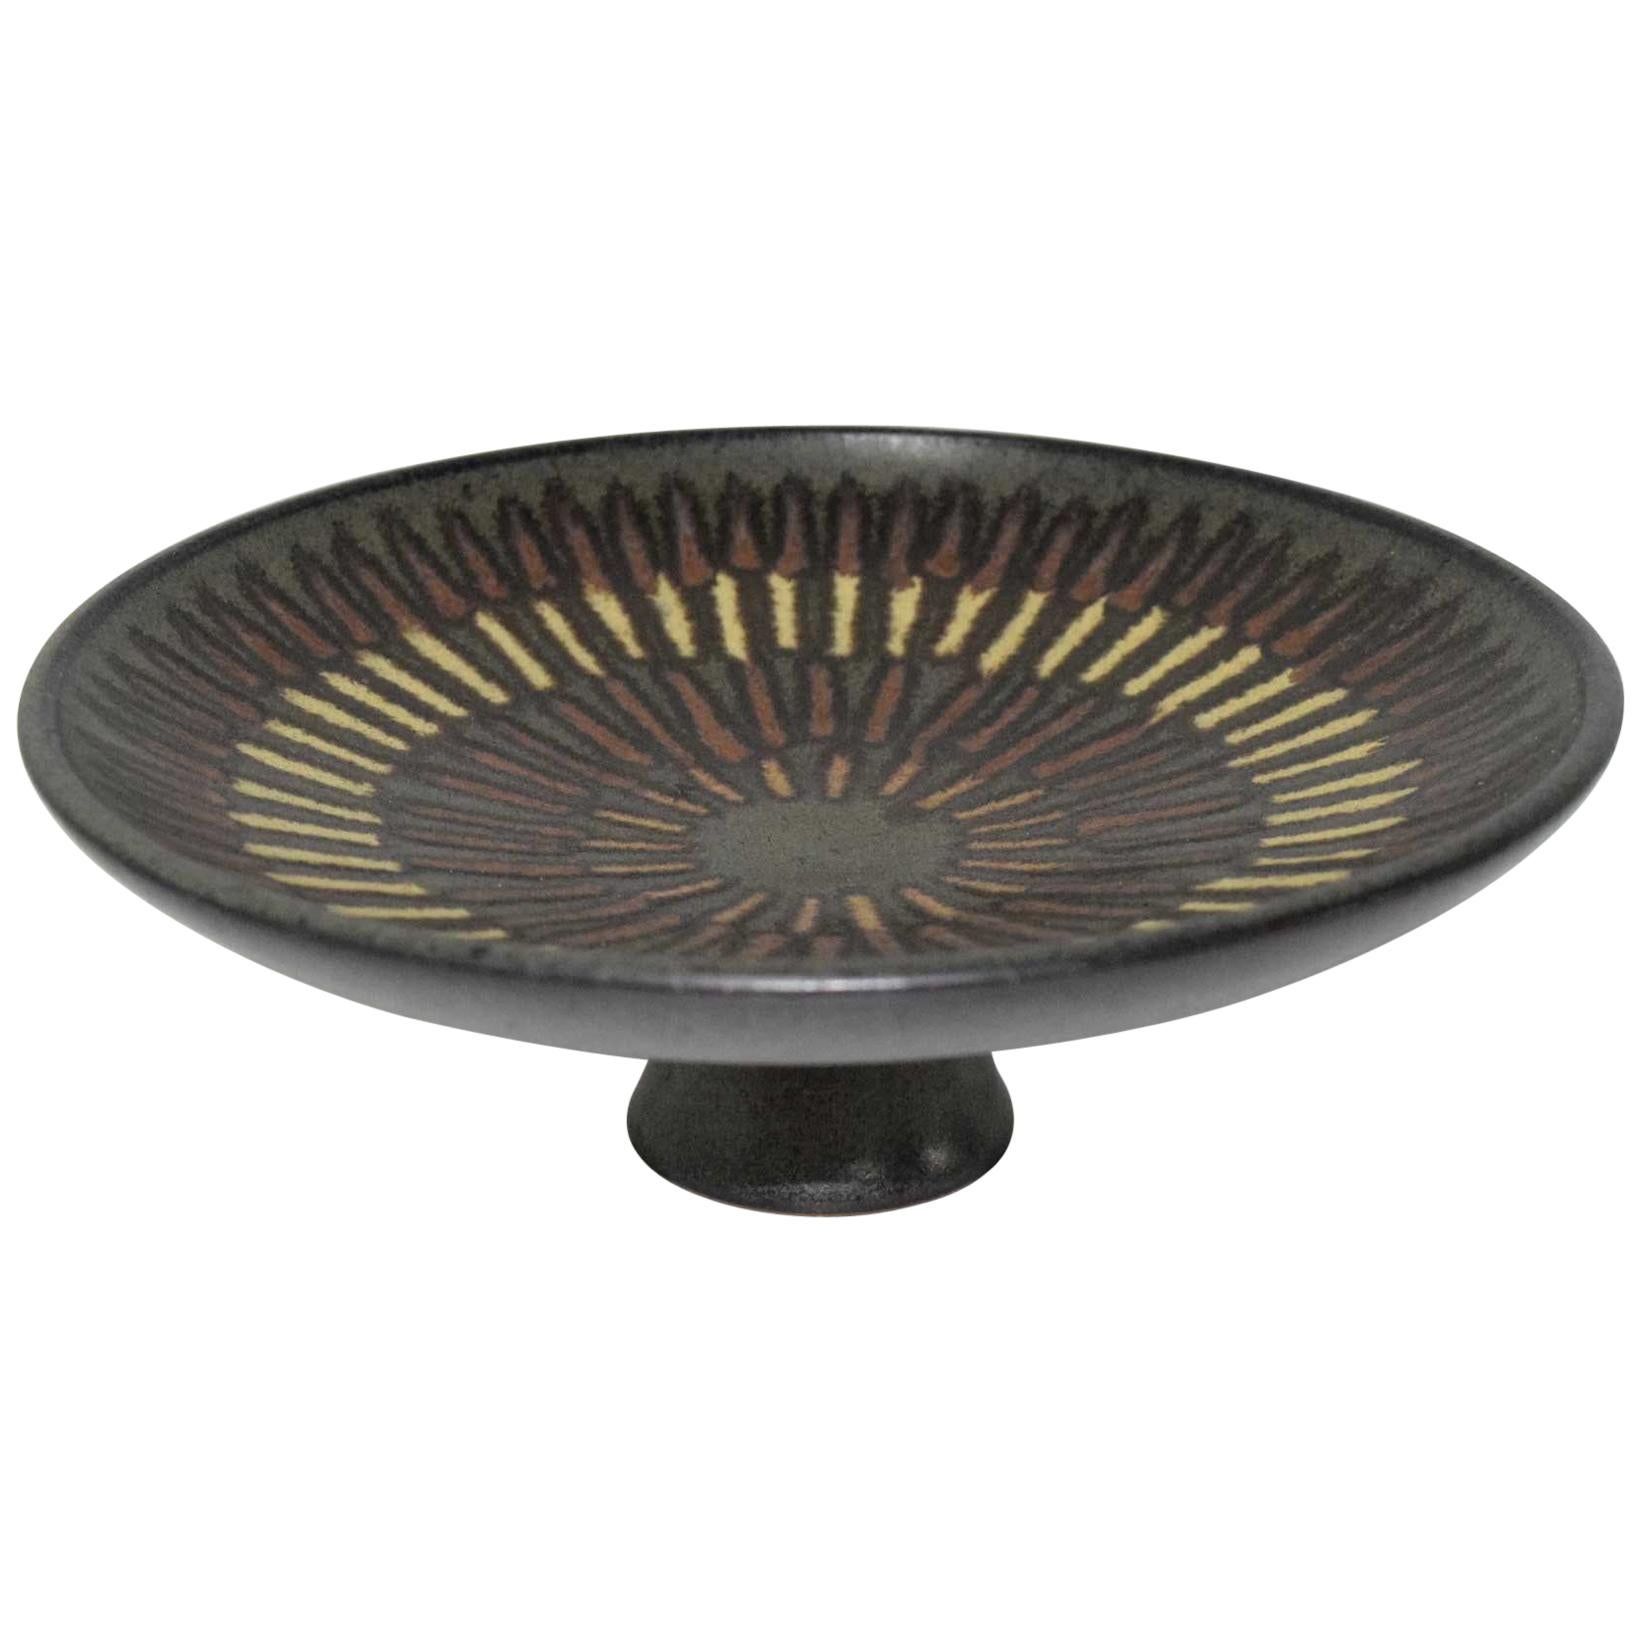 Clyde Burt Footed Tray Plate in Glazed Multicolored Stonewear For Sale